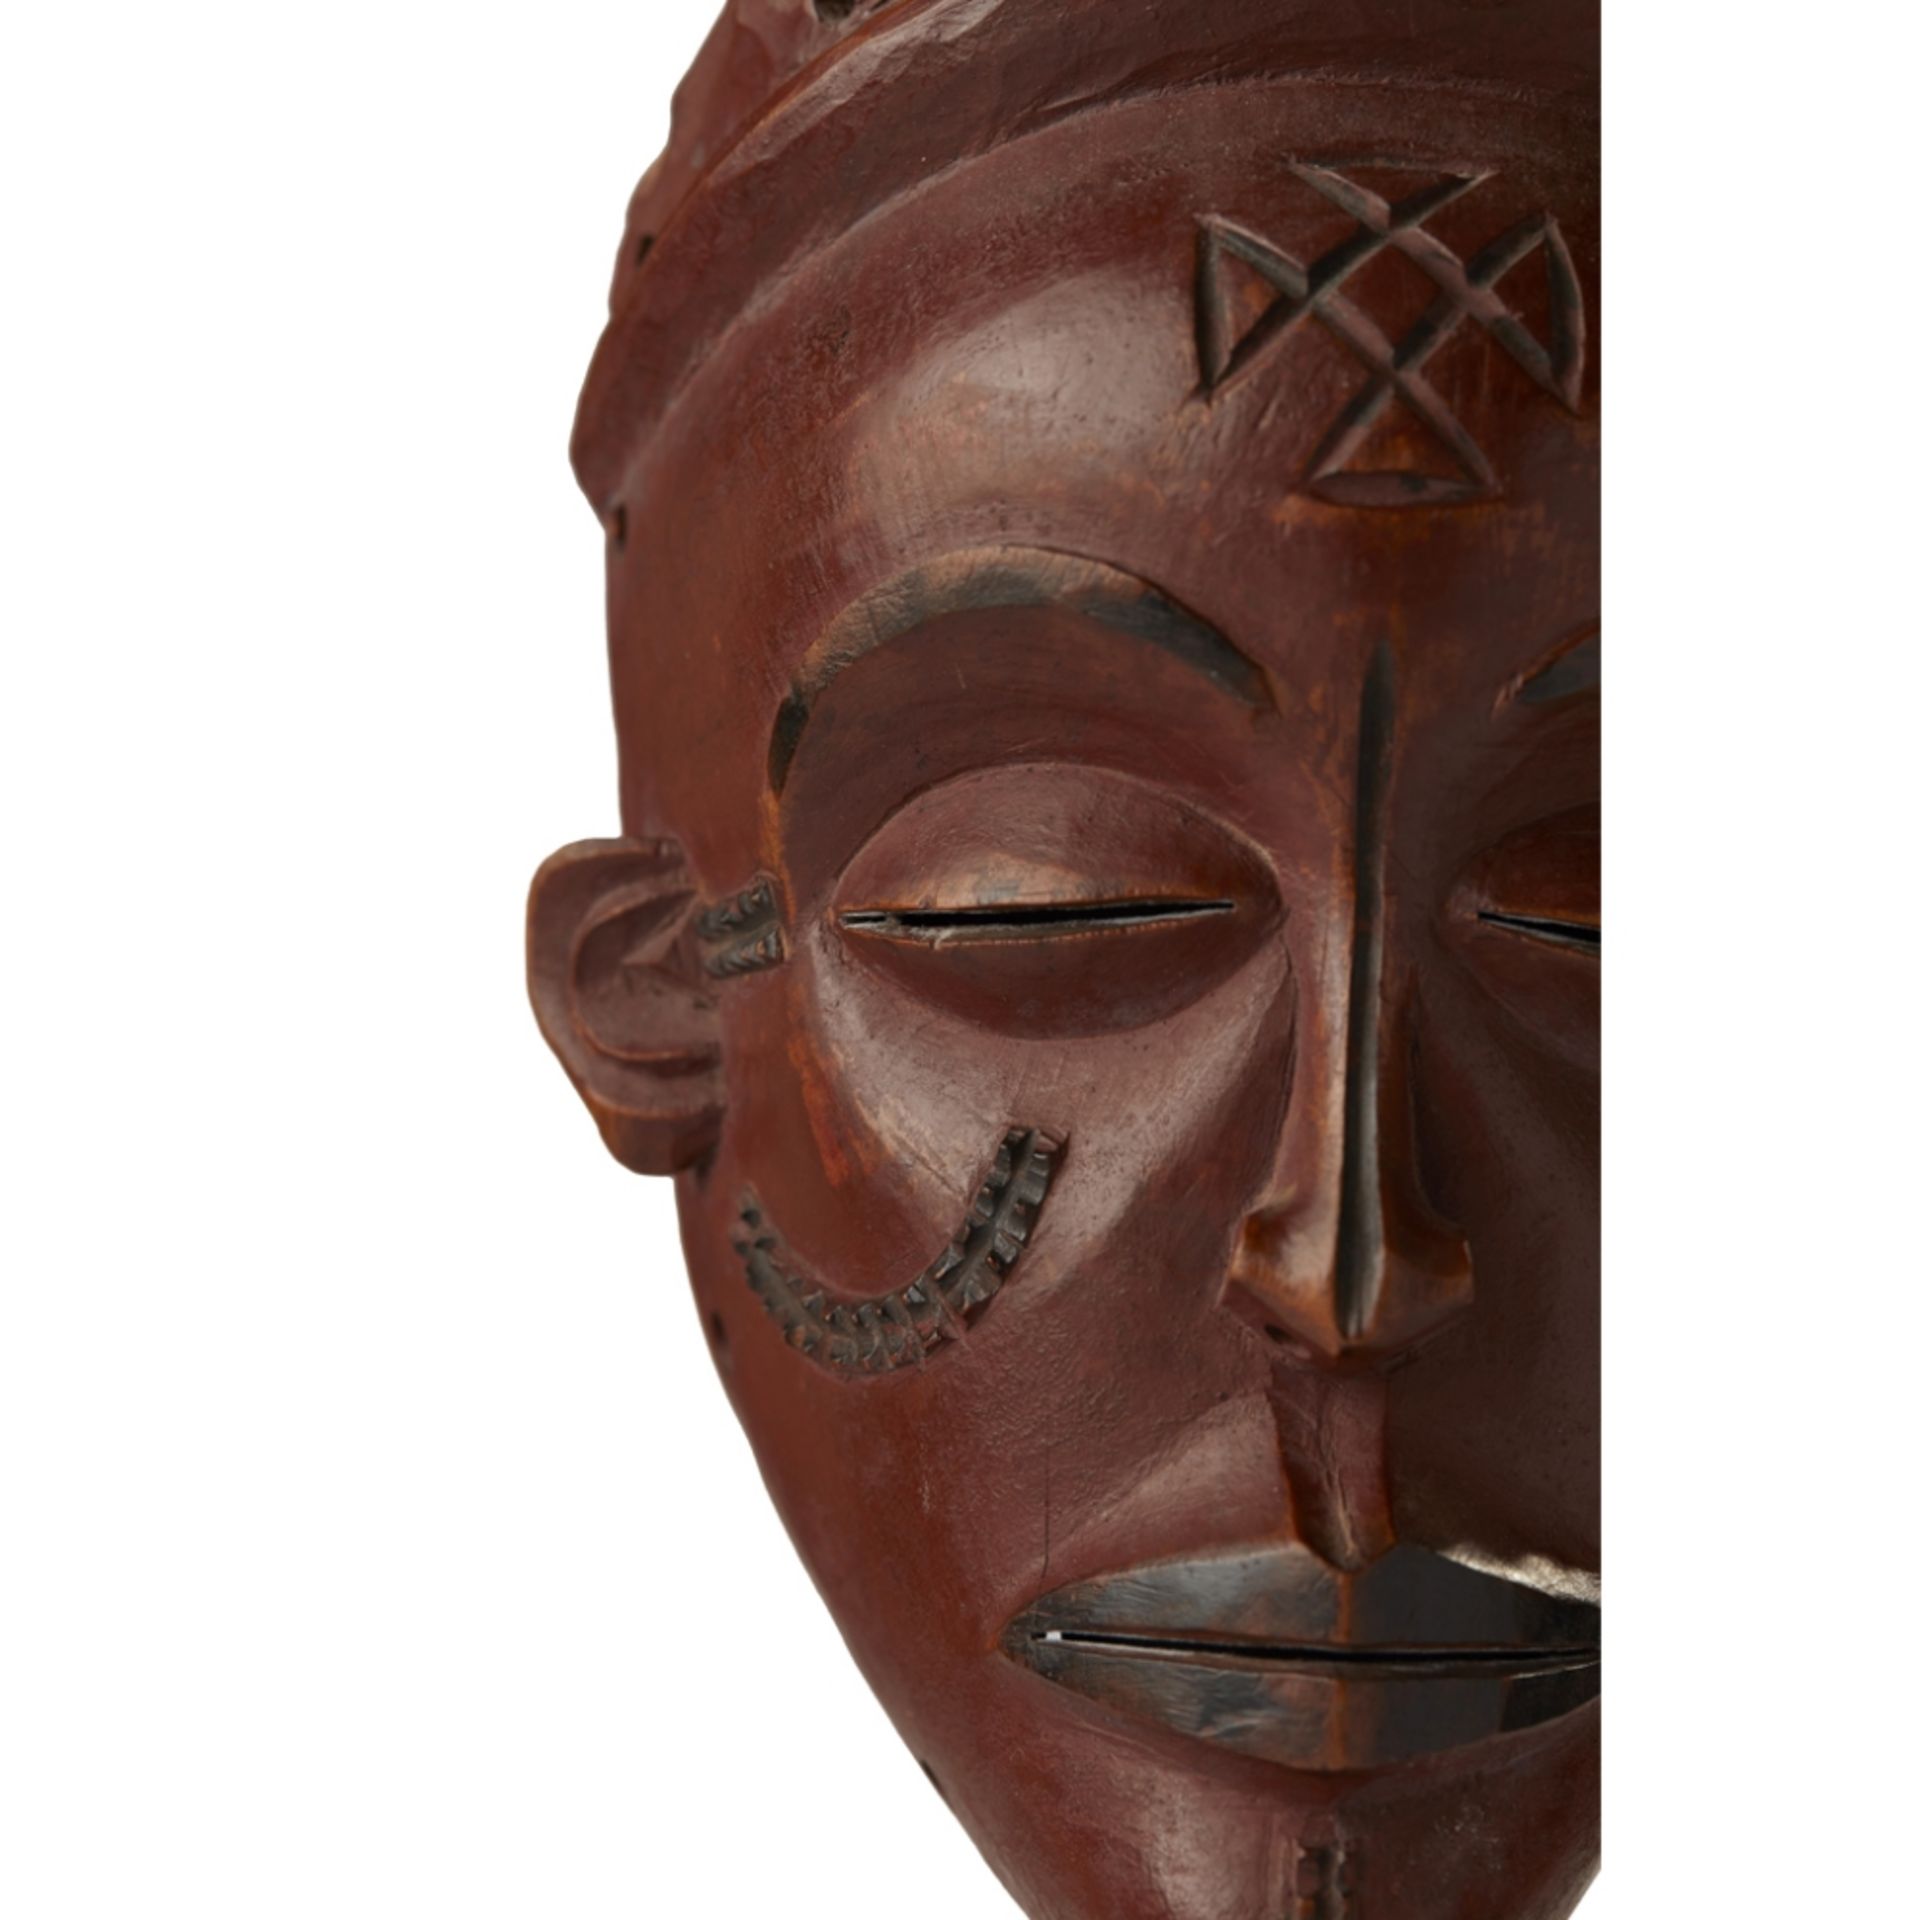 CHOKWE MASK, PWOANGOLA carved wood, the softly curving chin below fractionally parted lips, a medial - Image 2 of 6